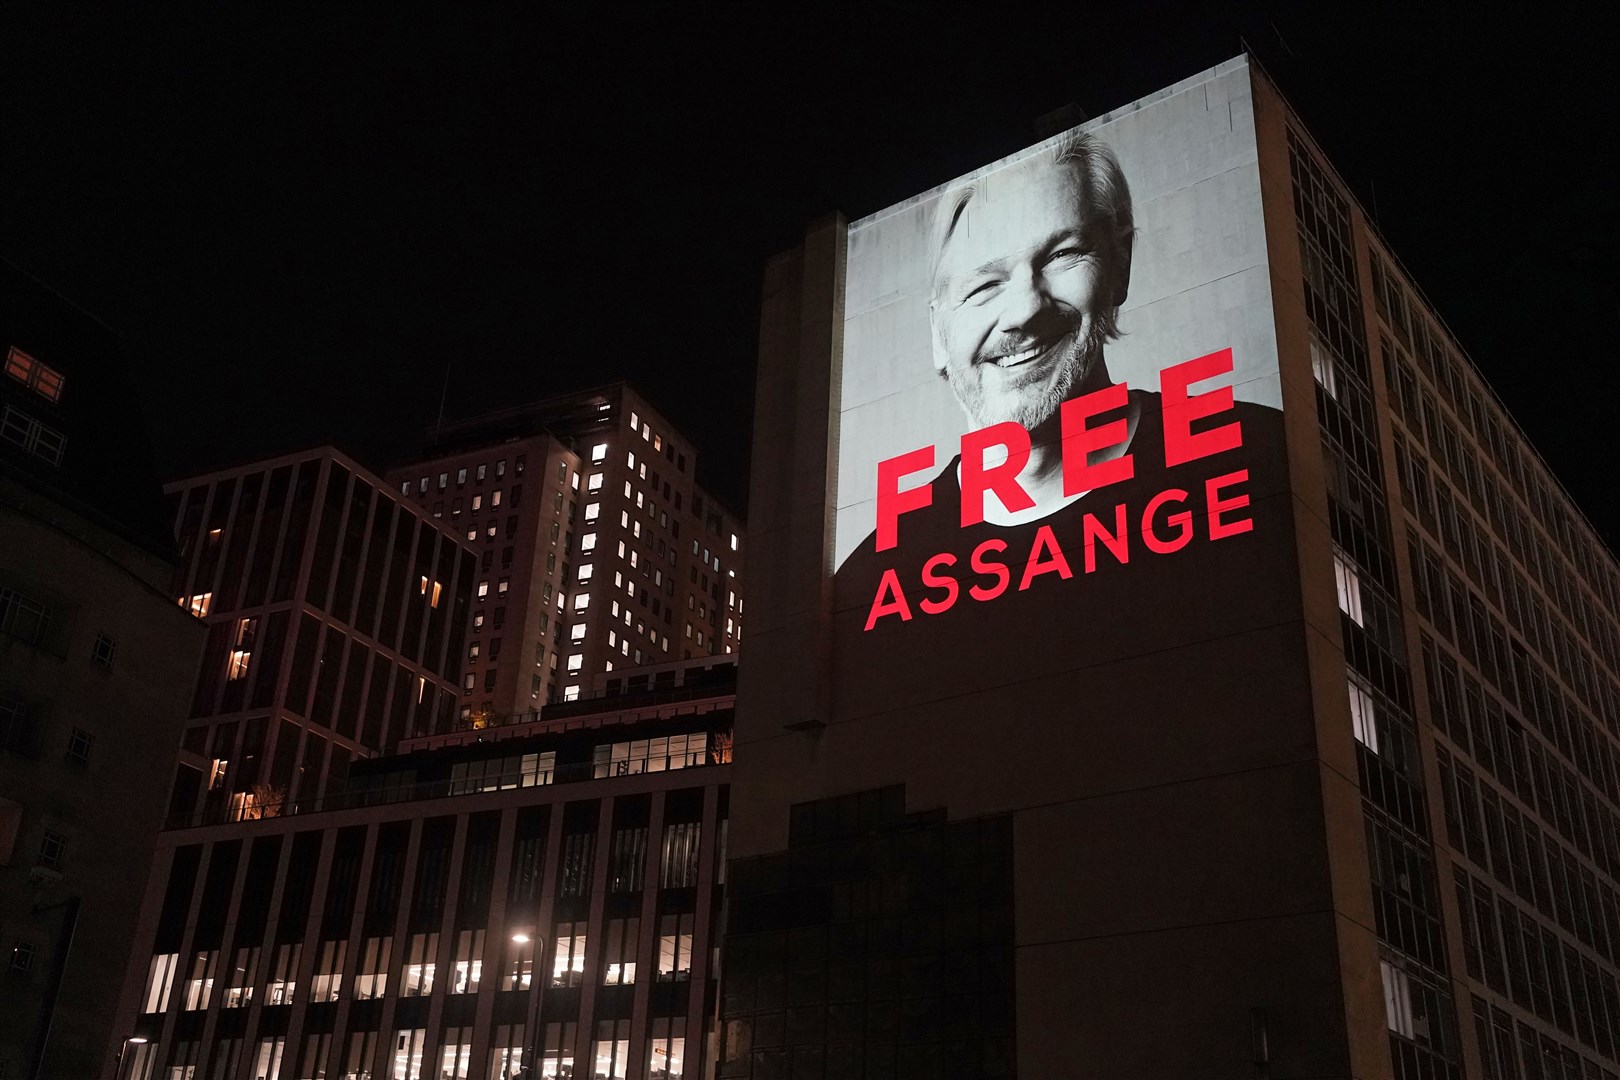 An image of Julian Assange is projected on to a building in Leake Street in central London to mark three years since his arrest and detention in Belmarsh Prison while the United States continues with legal moves to extradite him (Victoria Jones/PA)